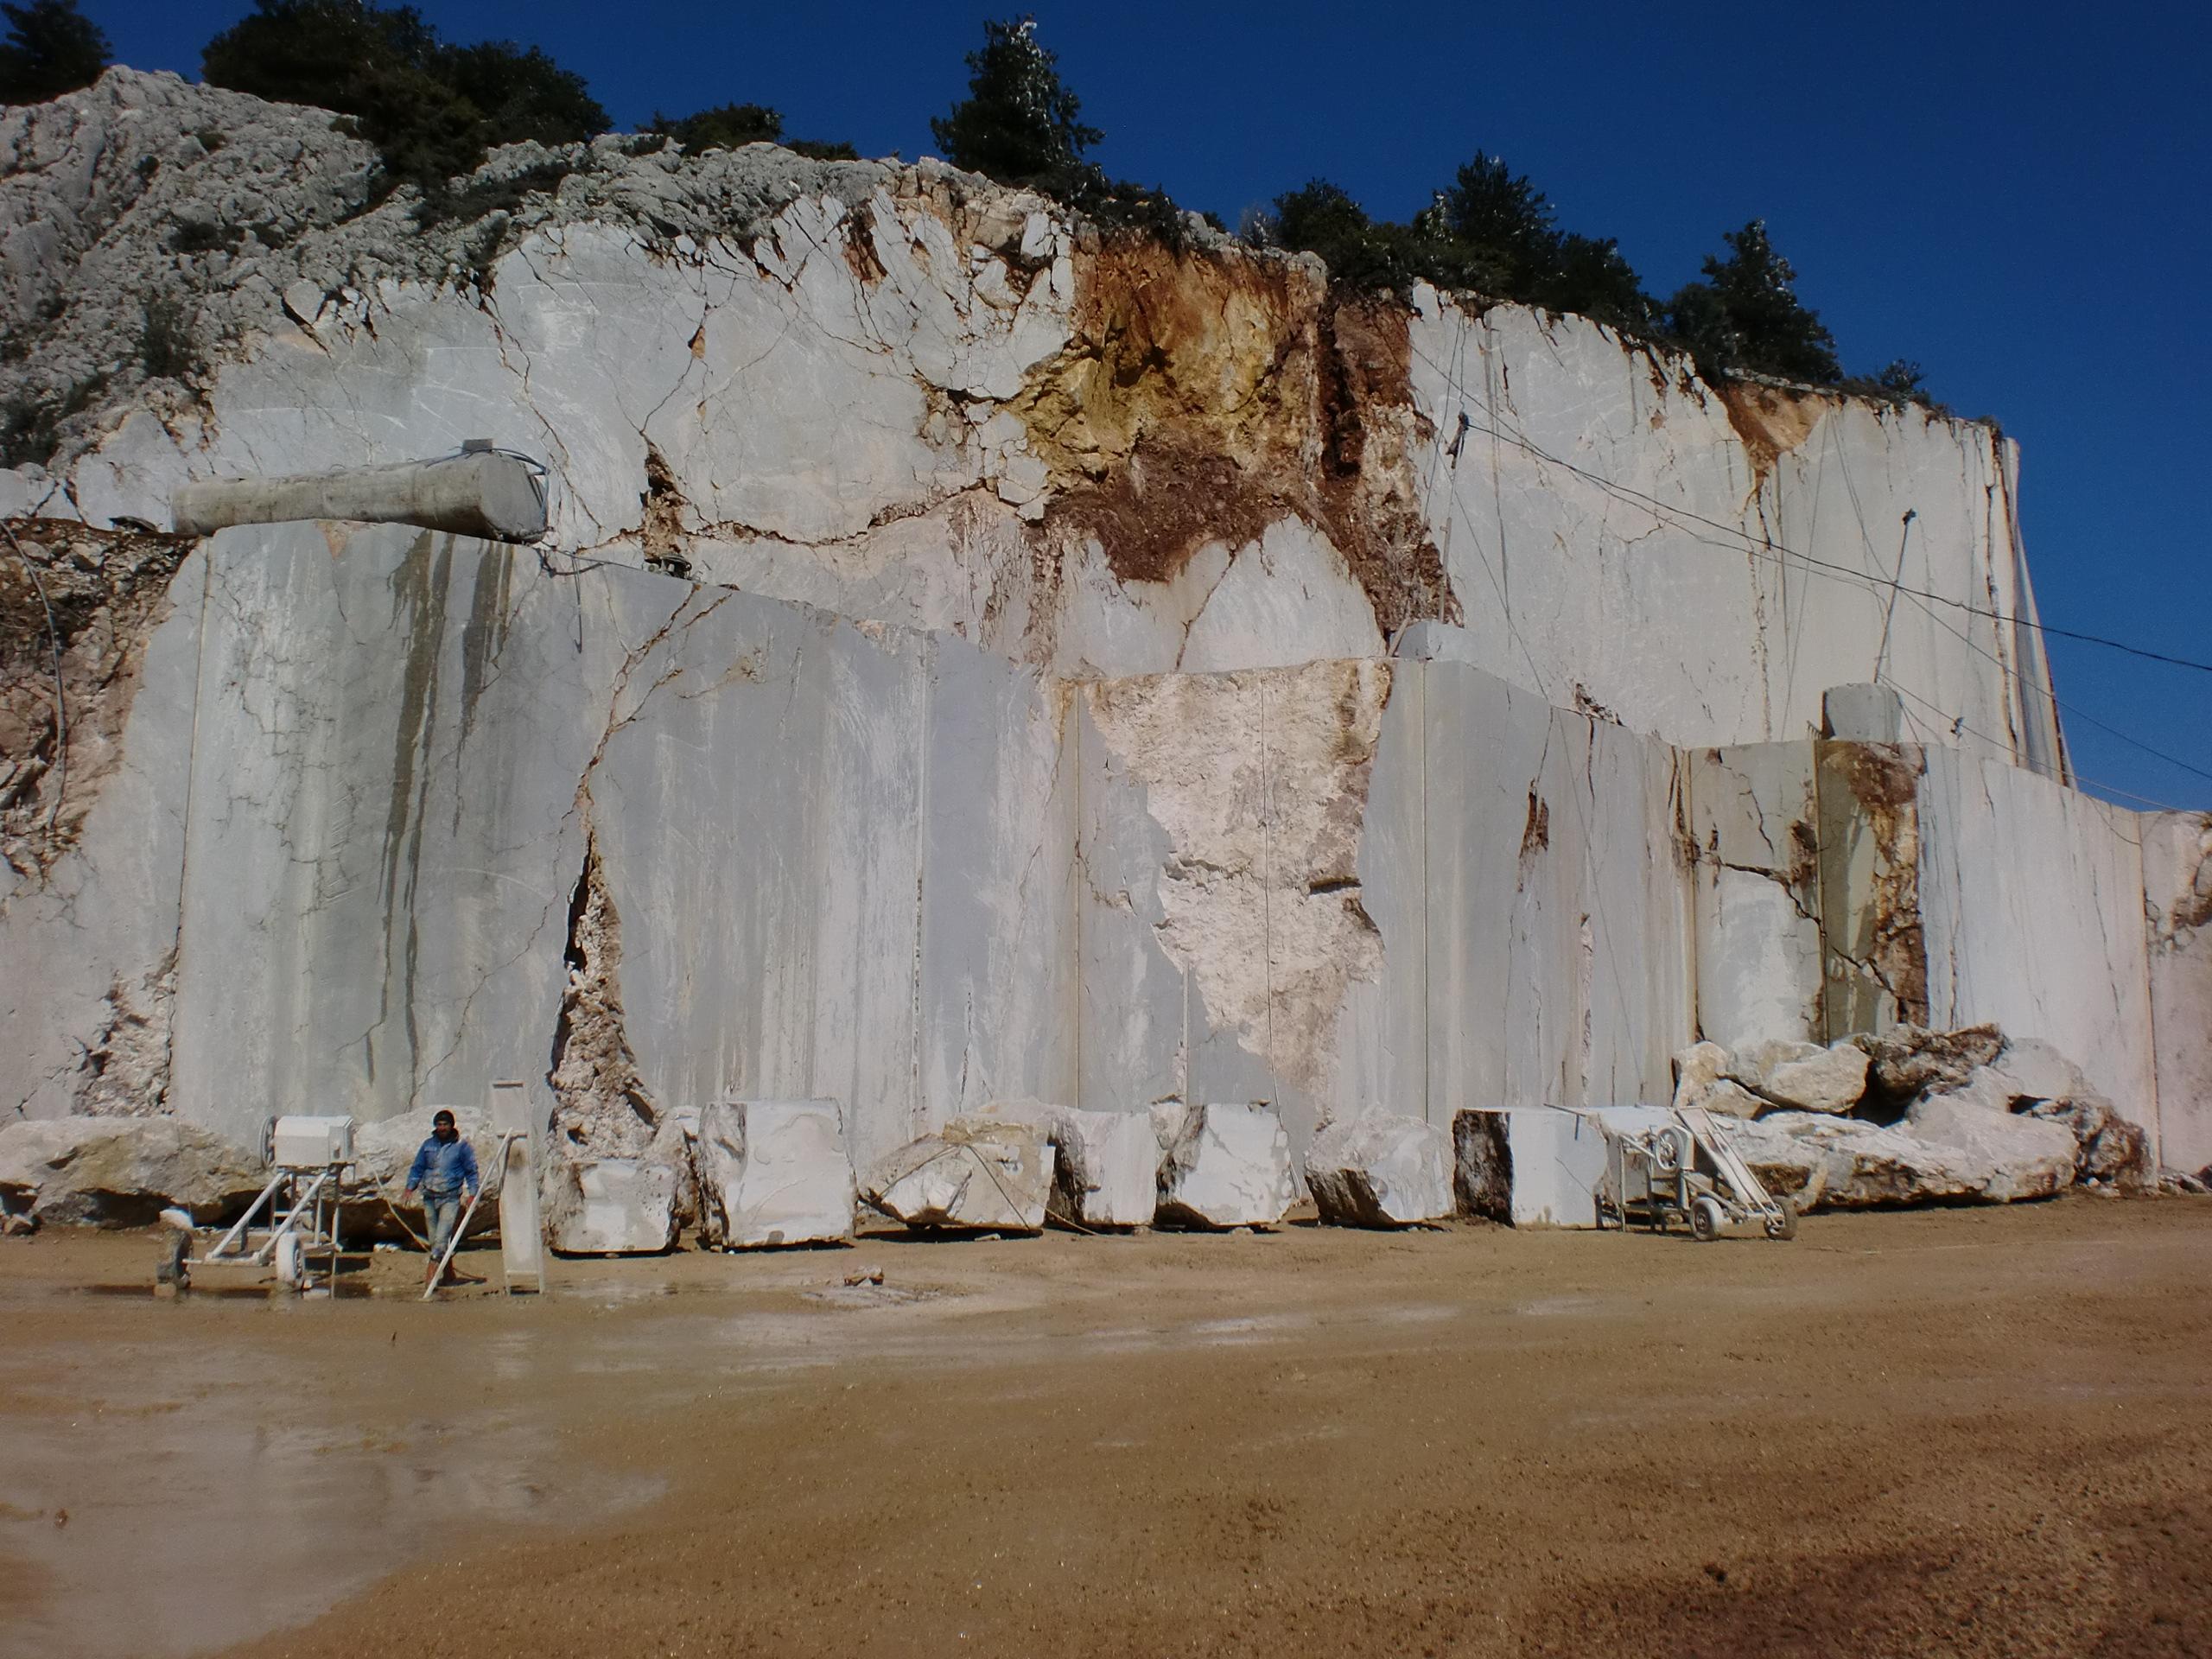 What are the common stone cutting methods in natural stone mining?